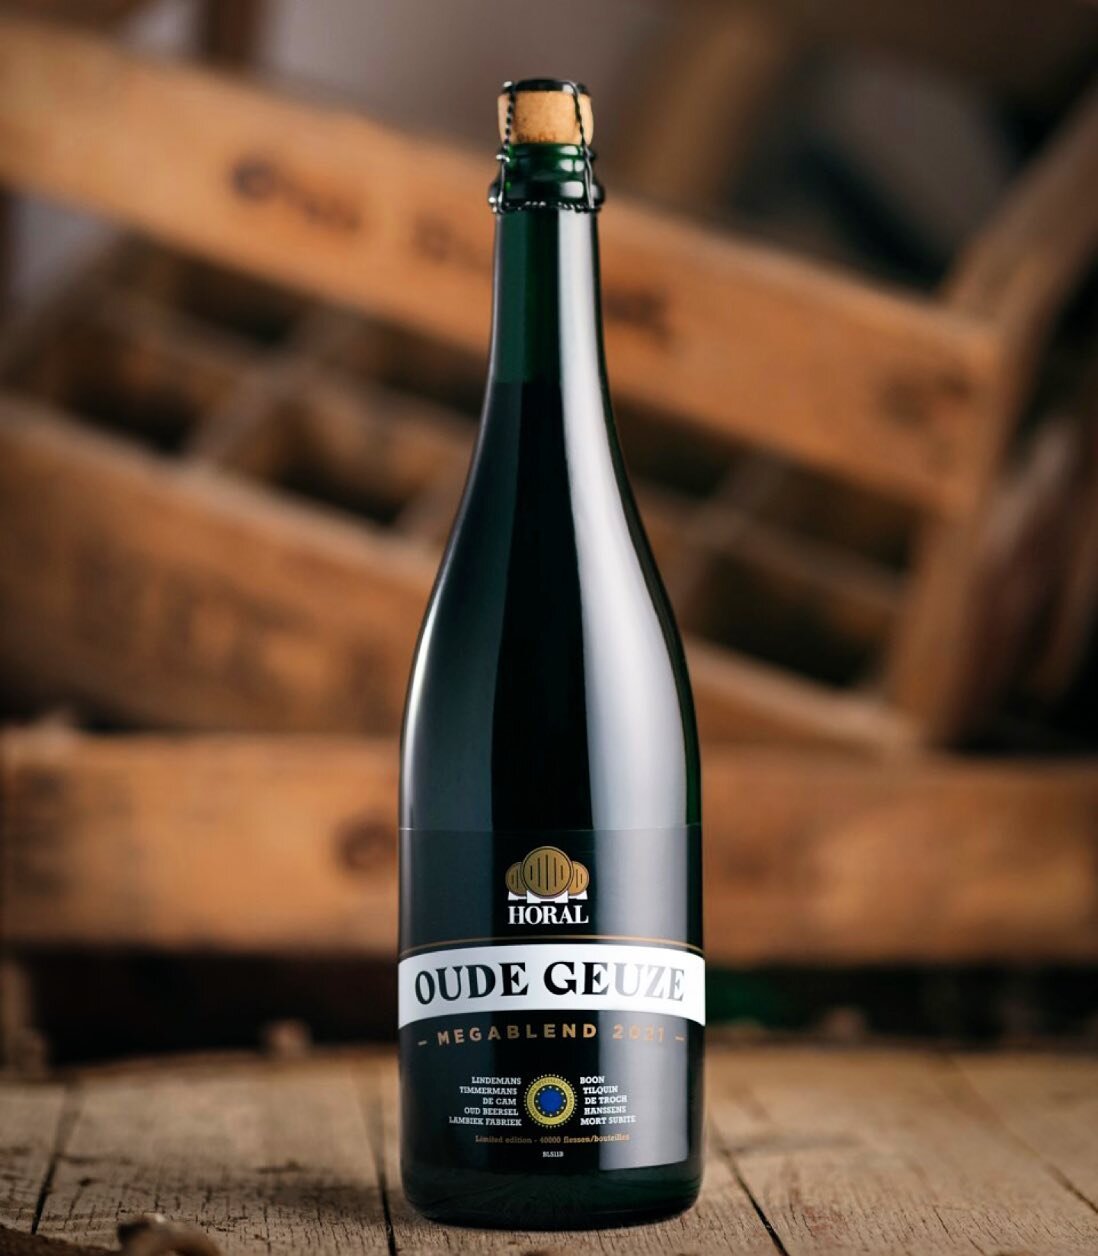 𝐇𝐎𝐑𝐀𝐋 𝐎𝐔𝐃𝐄 𝐆𝐔𝐄𝐙𝐄 𝐌𝐄𝐆𝐀𝐁𝐋𝐄𝐍𝐃 𝟐𝟎𝟐𝟏

Produced every 2 years to commemorate Toer de Geuze, 2021 is a blend of young and old lambic from all HORAL members @brouwerij_boon De Oude Cam, De Troch, Hanssens, Lambiek Fabriek, @lindema